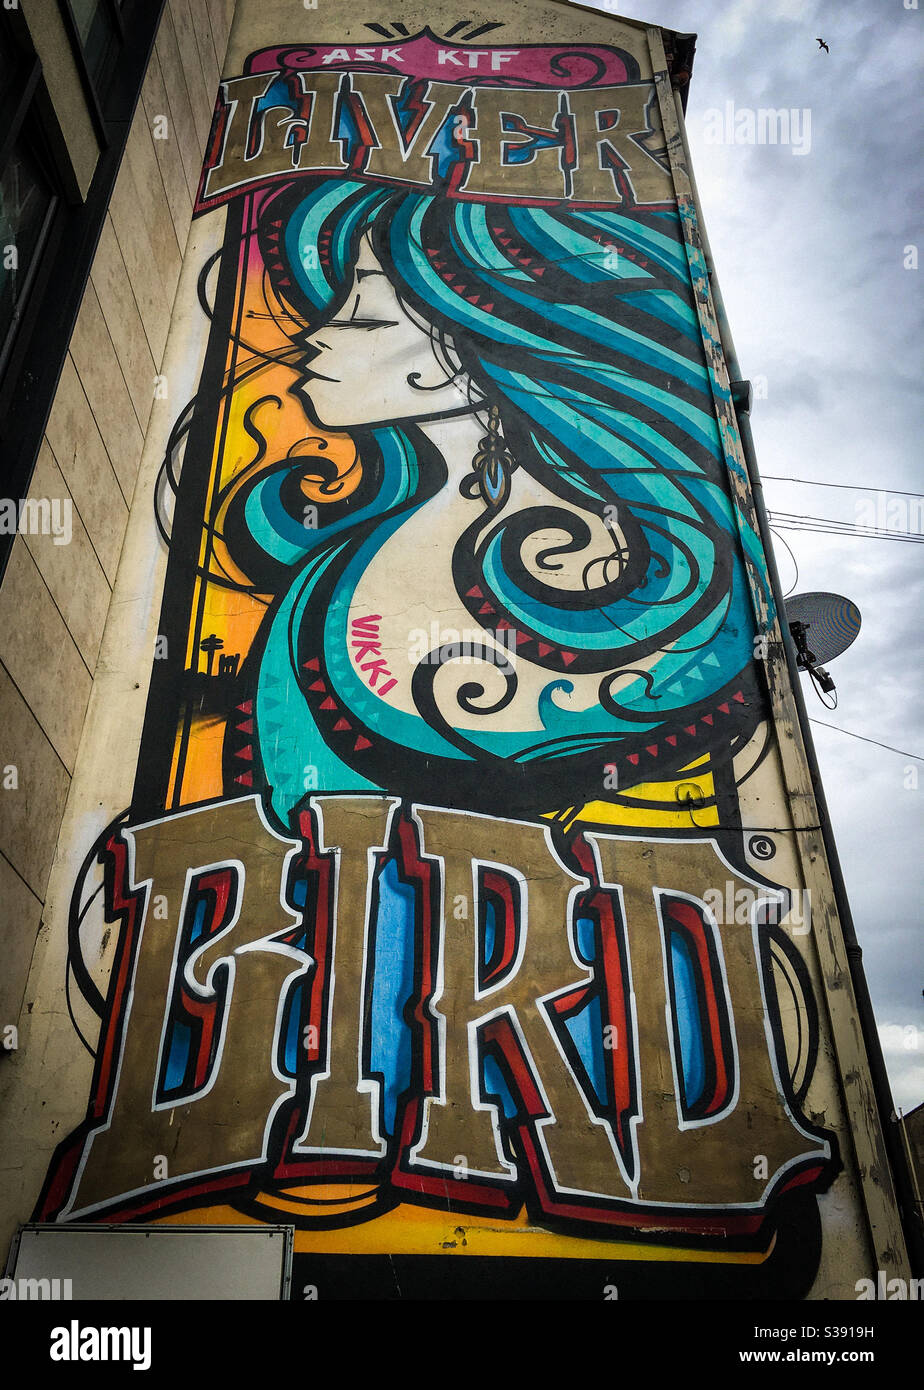 Liver Bird mural painted on the side of a building in Liverpool, UK Stock Photo